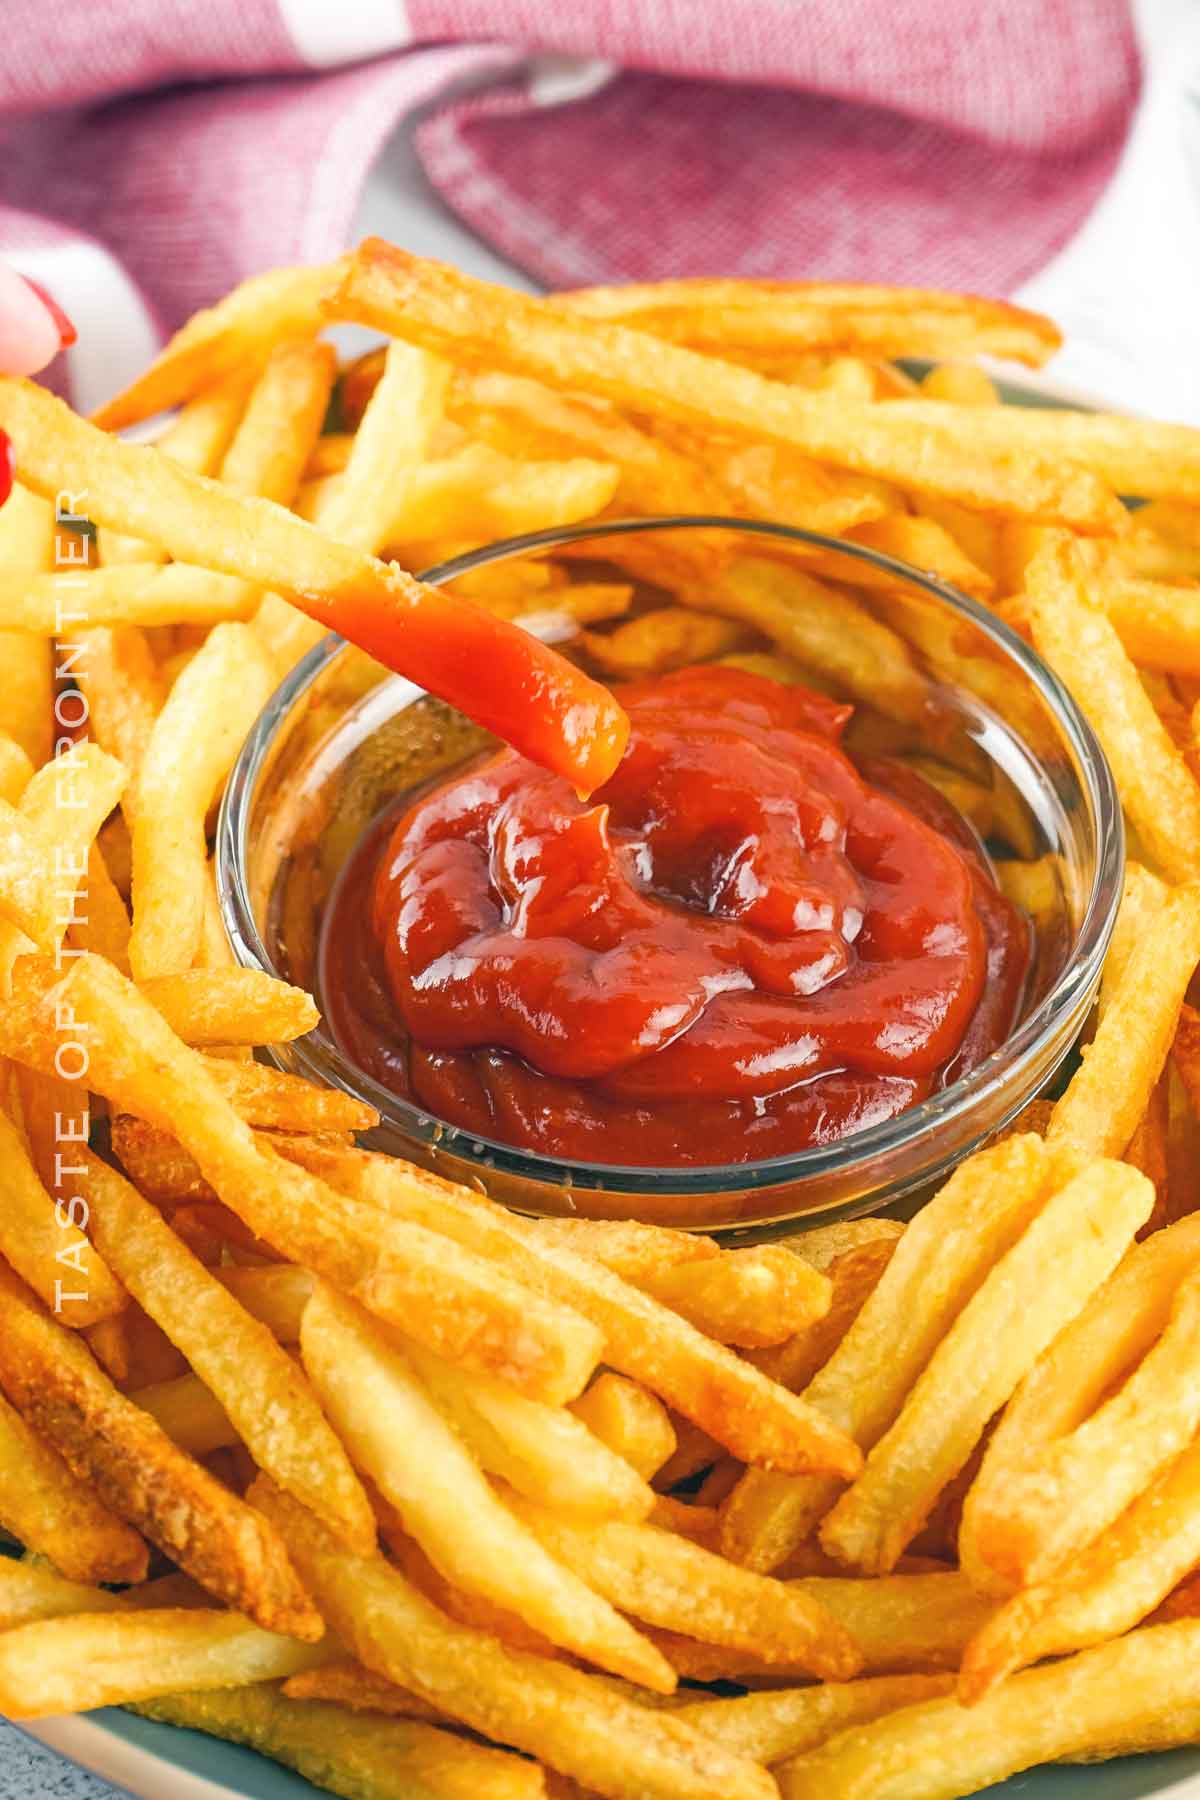 fries with ketchup